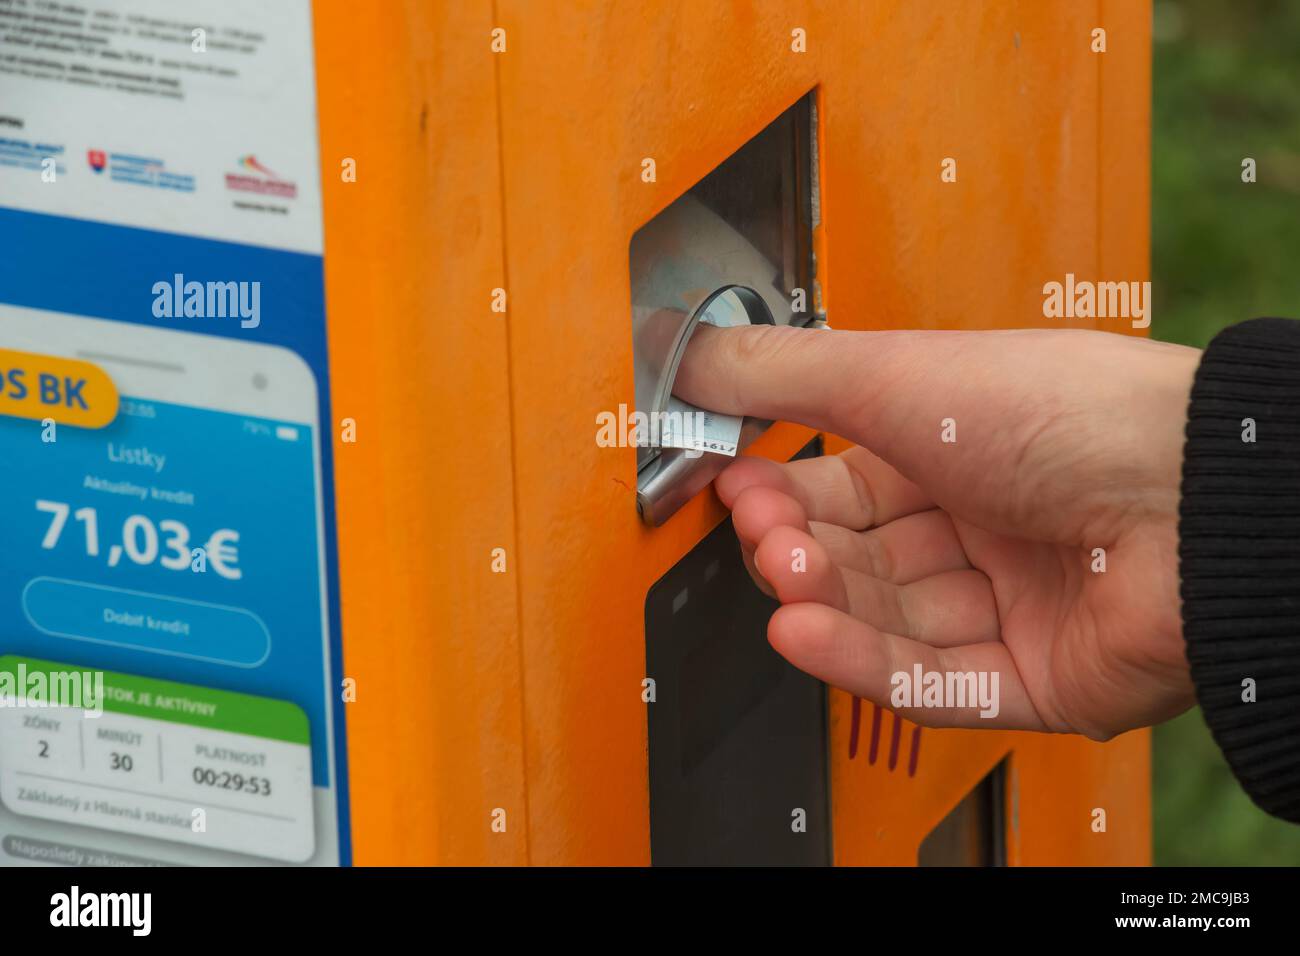 A woman's hand buys a ticket in a ticket machine. Stock Photo